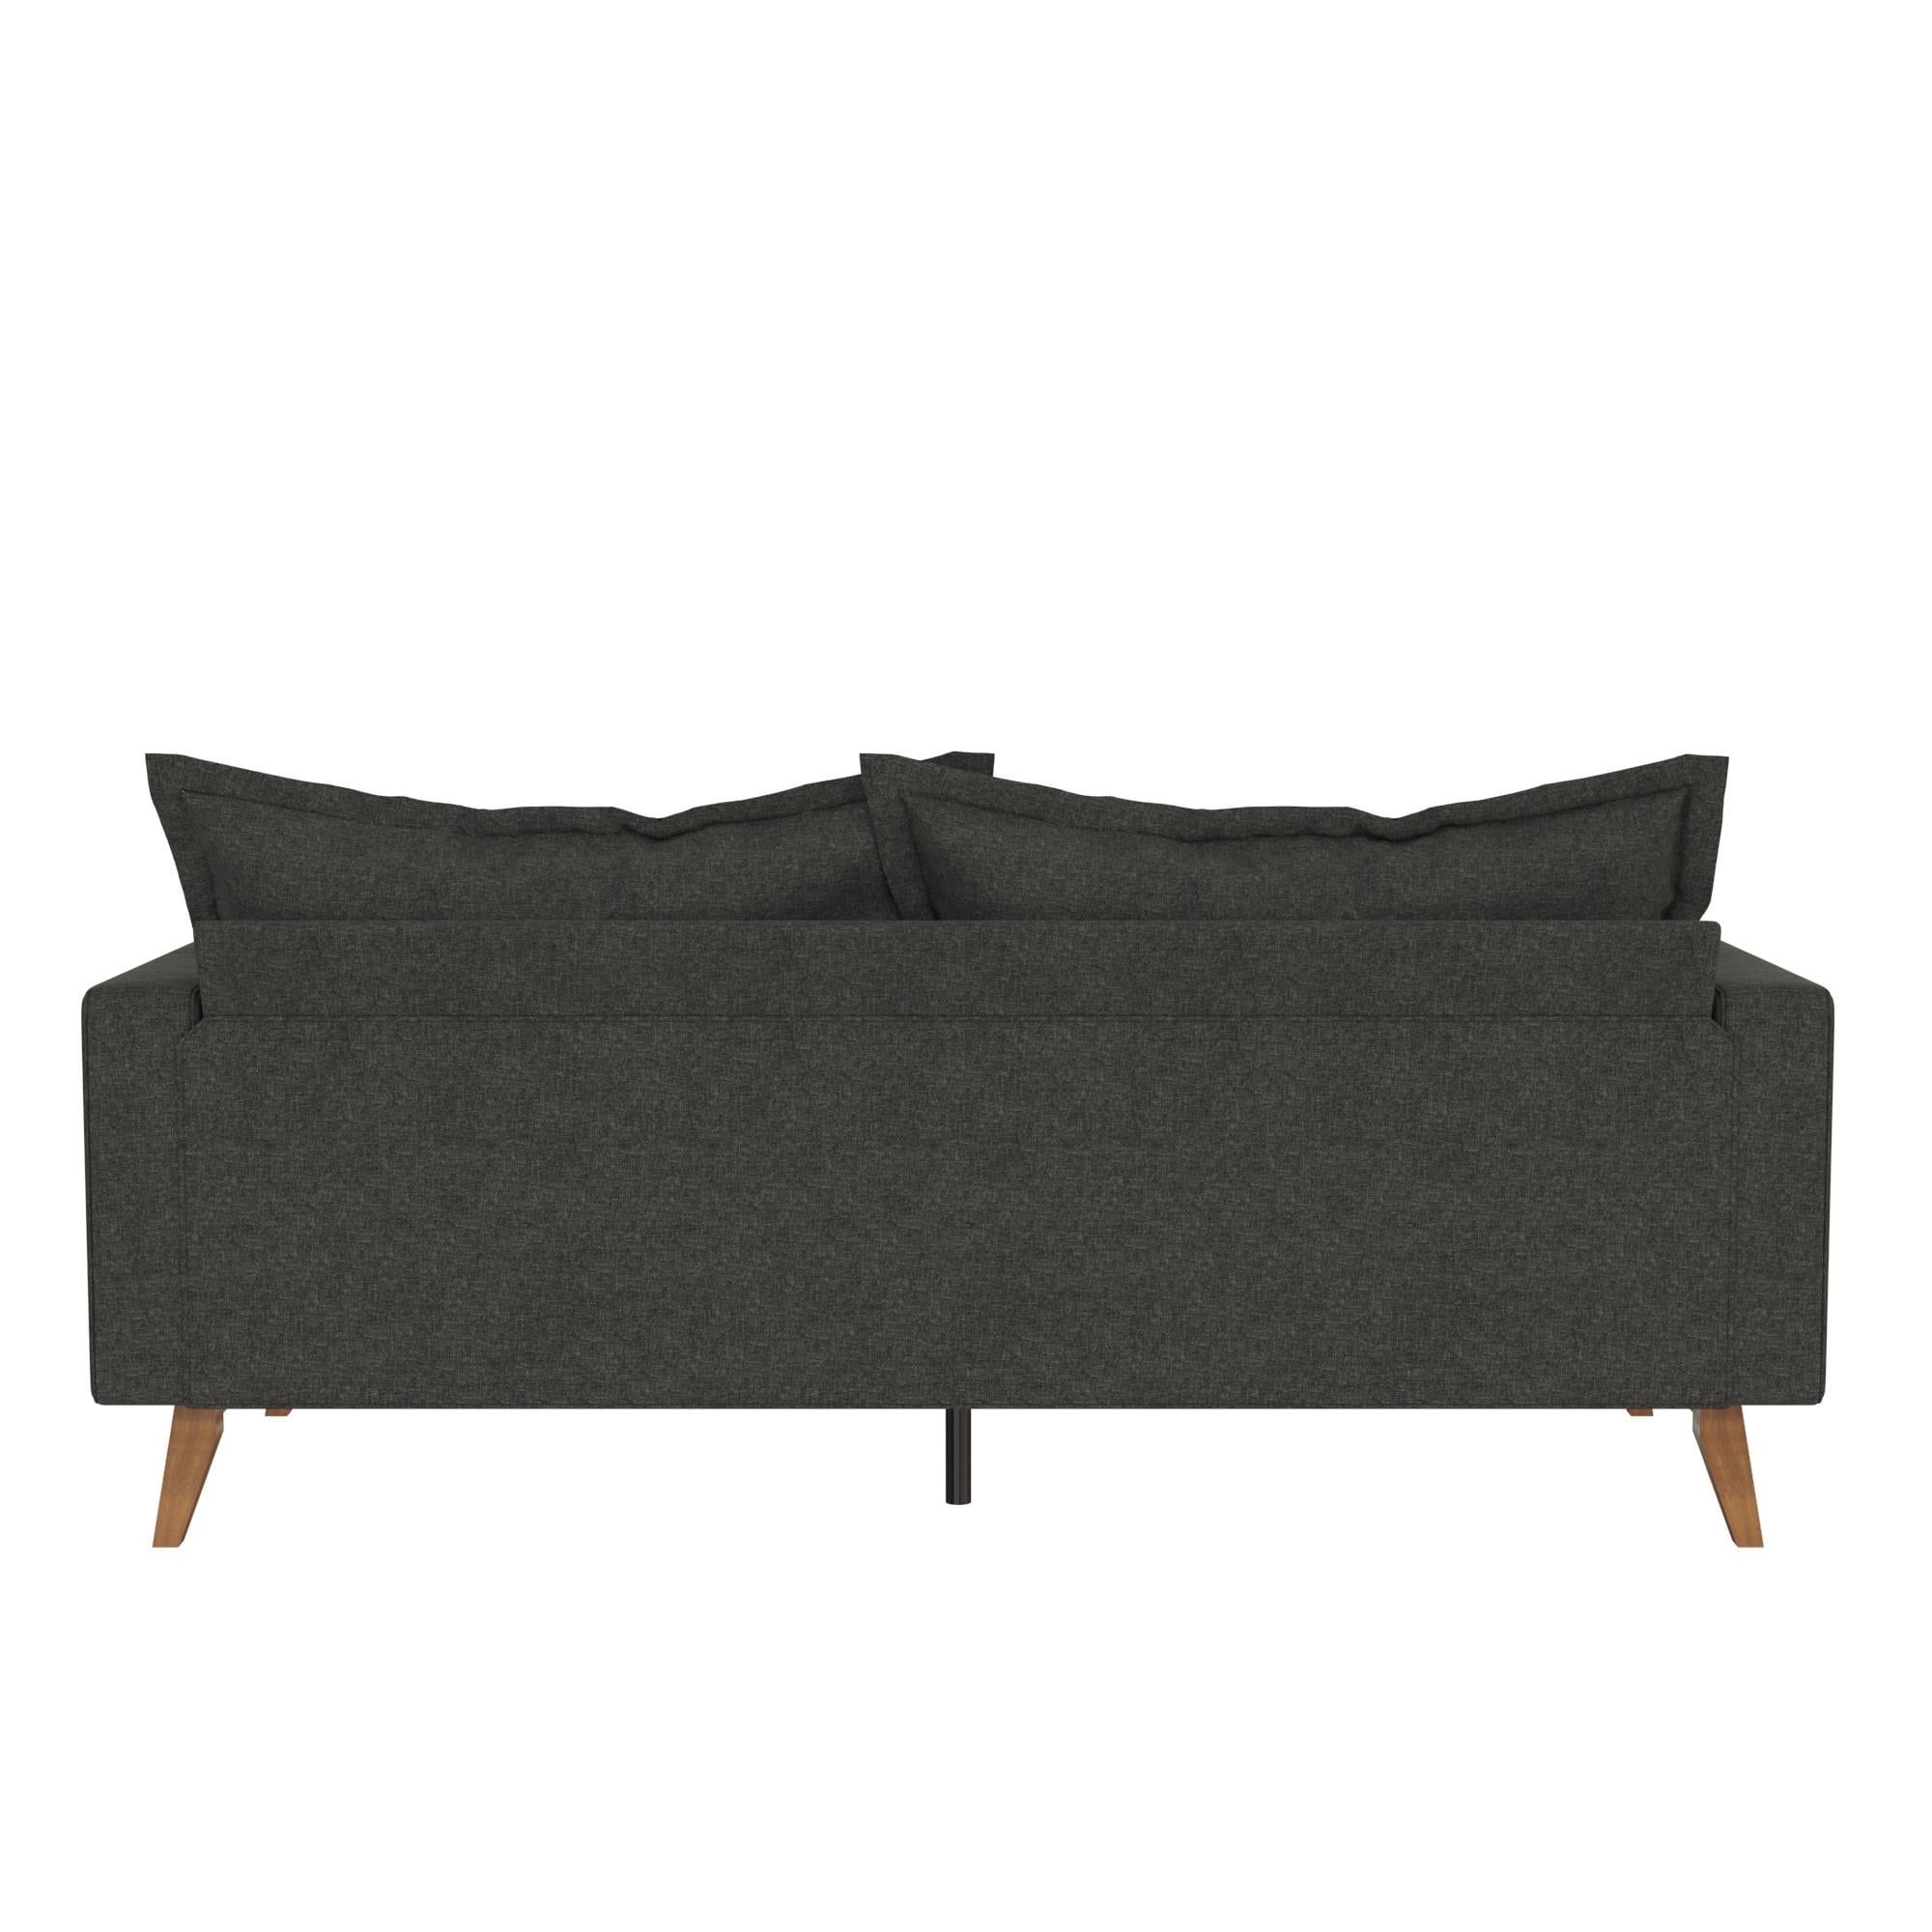 Dhp Miriam Pillowback Wood Base Sofa, Gray Linen – Walmart With Regard To Sofas With Pillowback Wood Bases (View 3 of 15)